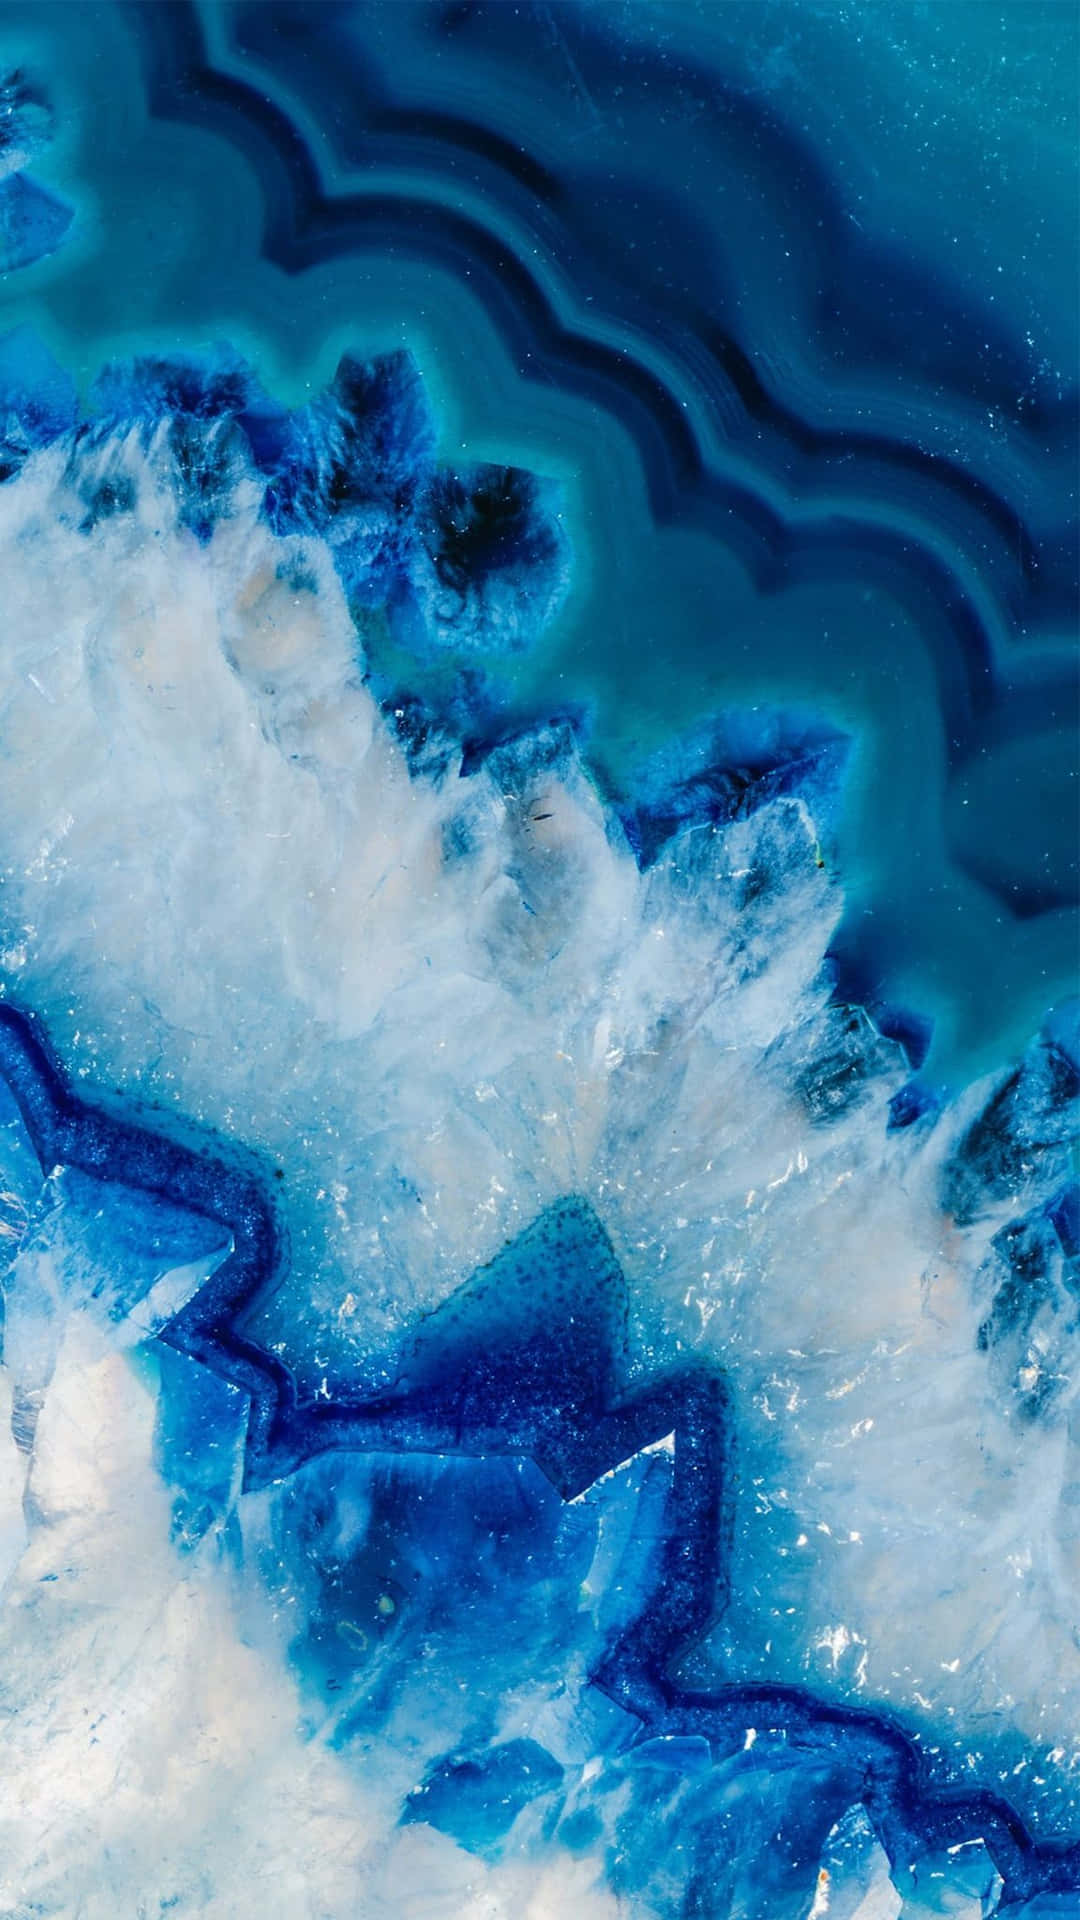 A Blue And White Agate In The Water Background